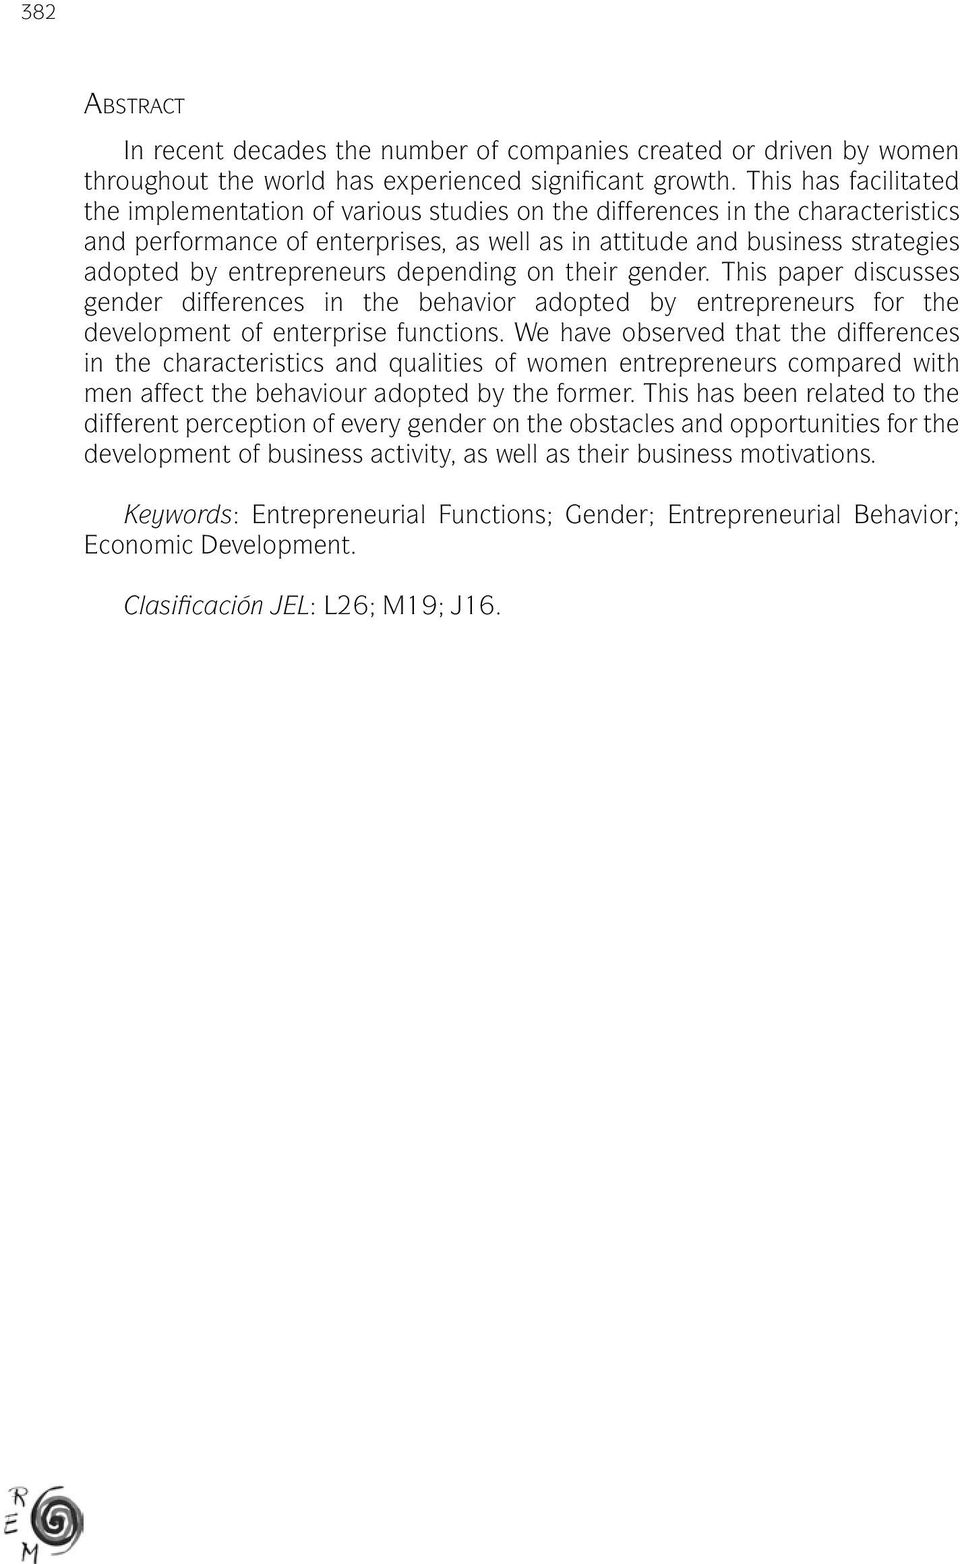 entrepreneurs depending on their gender. This paper discusses gender differences in the behavior adopted by entrepreneurs for the development of enterprise functions.